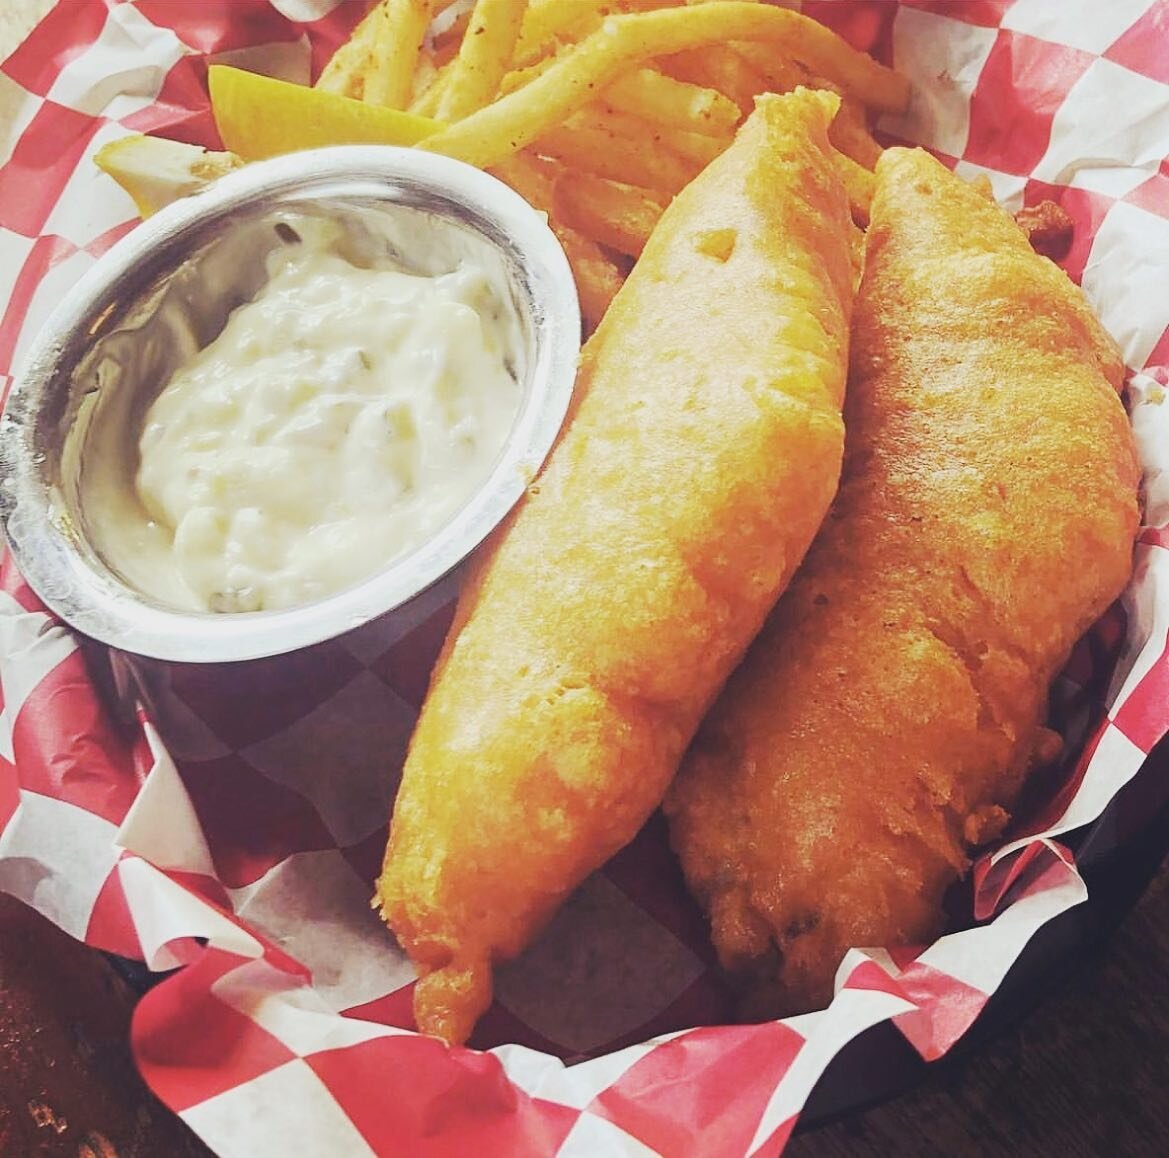 Guess what we have available every Friday?? You betchya! For sure! Oh yahhh. #fishfryfriday #minneapolis #nokomislife #goodfoodnobull #beer